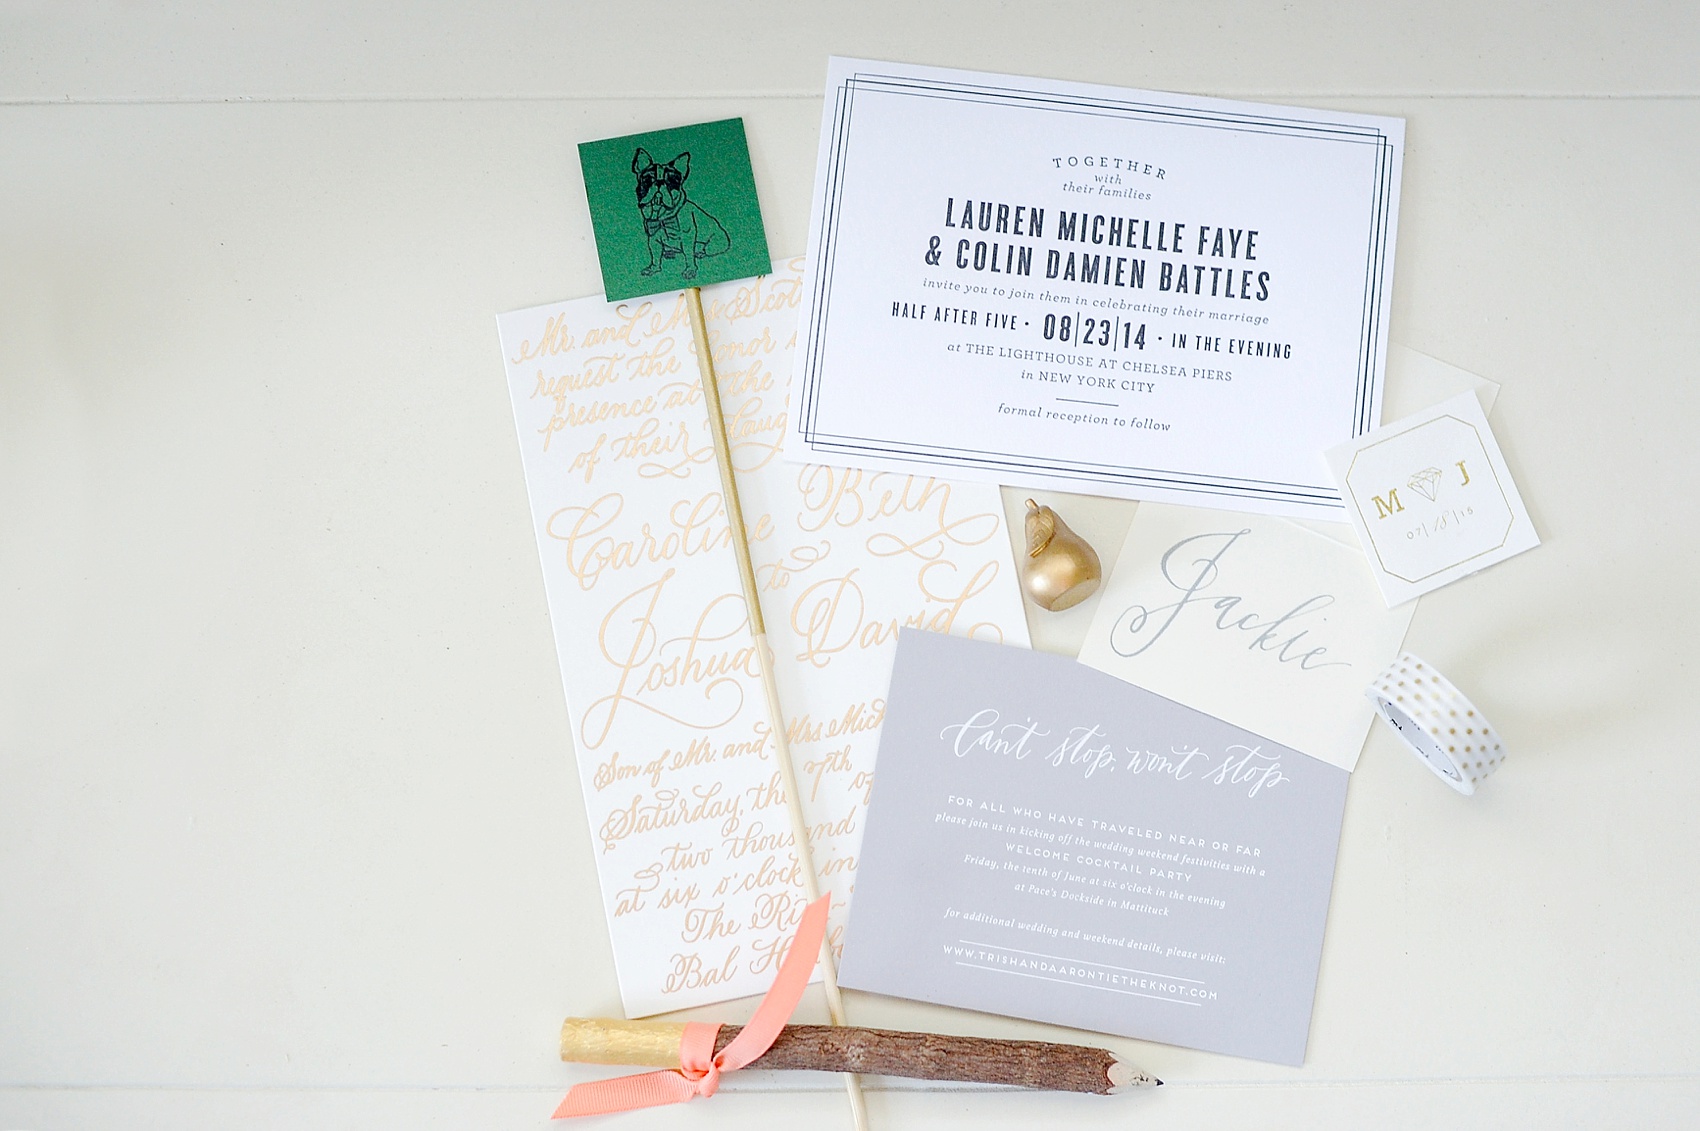 Custom wedding invitations and stationery. Coworking with Mikkel Paige Photography and Sincerely Jackie, NYC wedding pros.